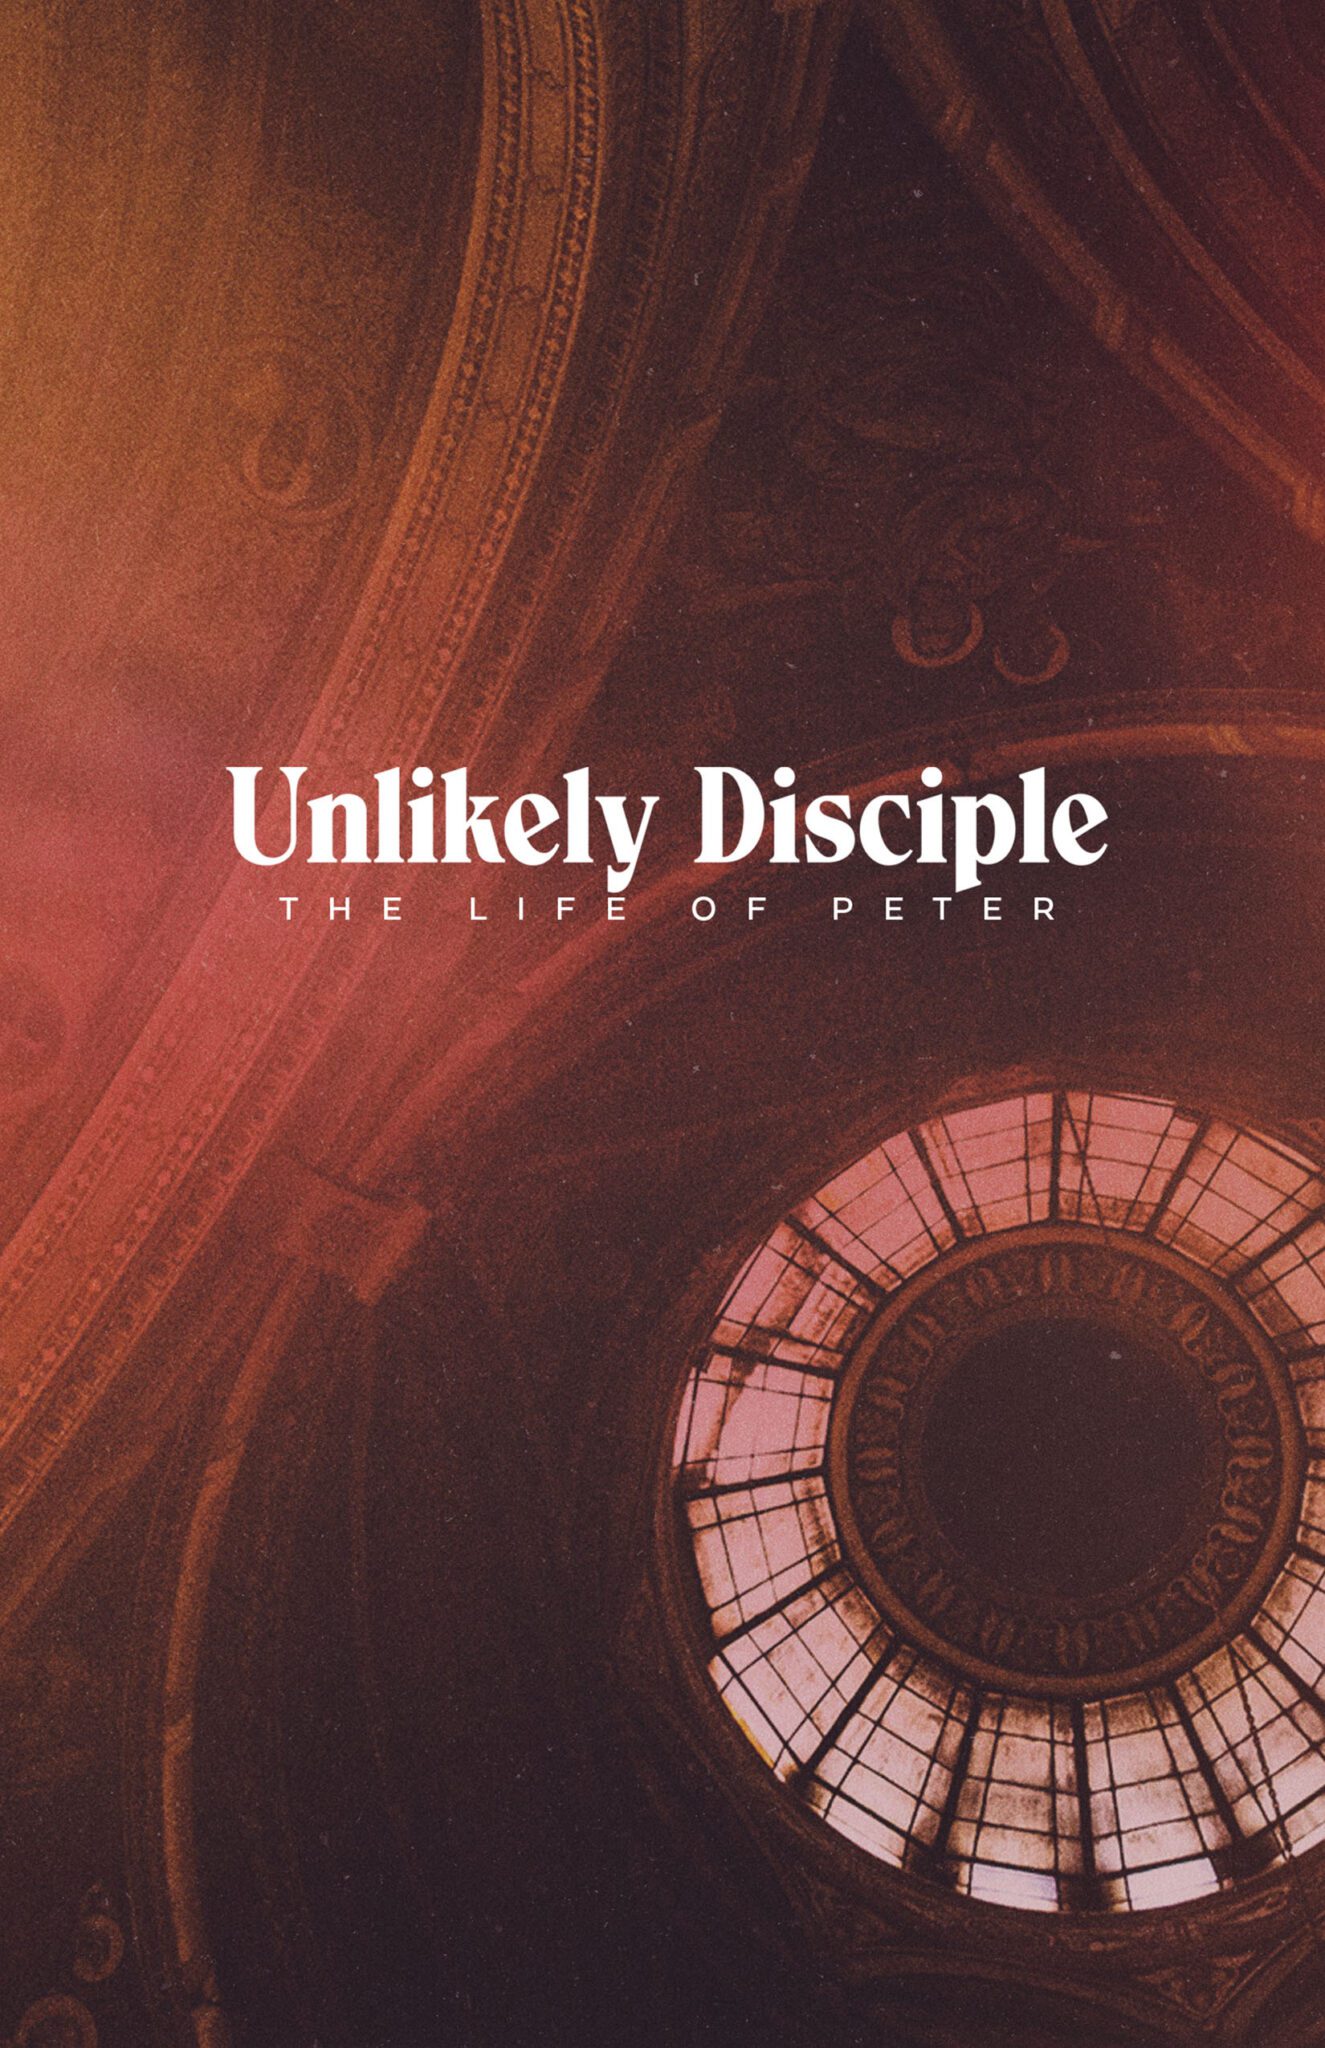 Unlikely Disciple: A More Beautiful Way